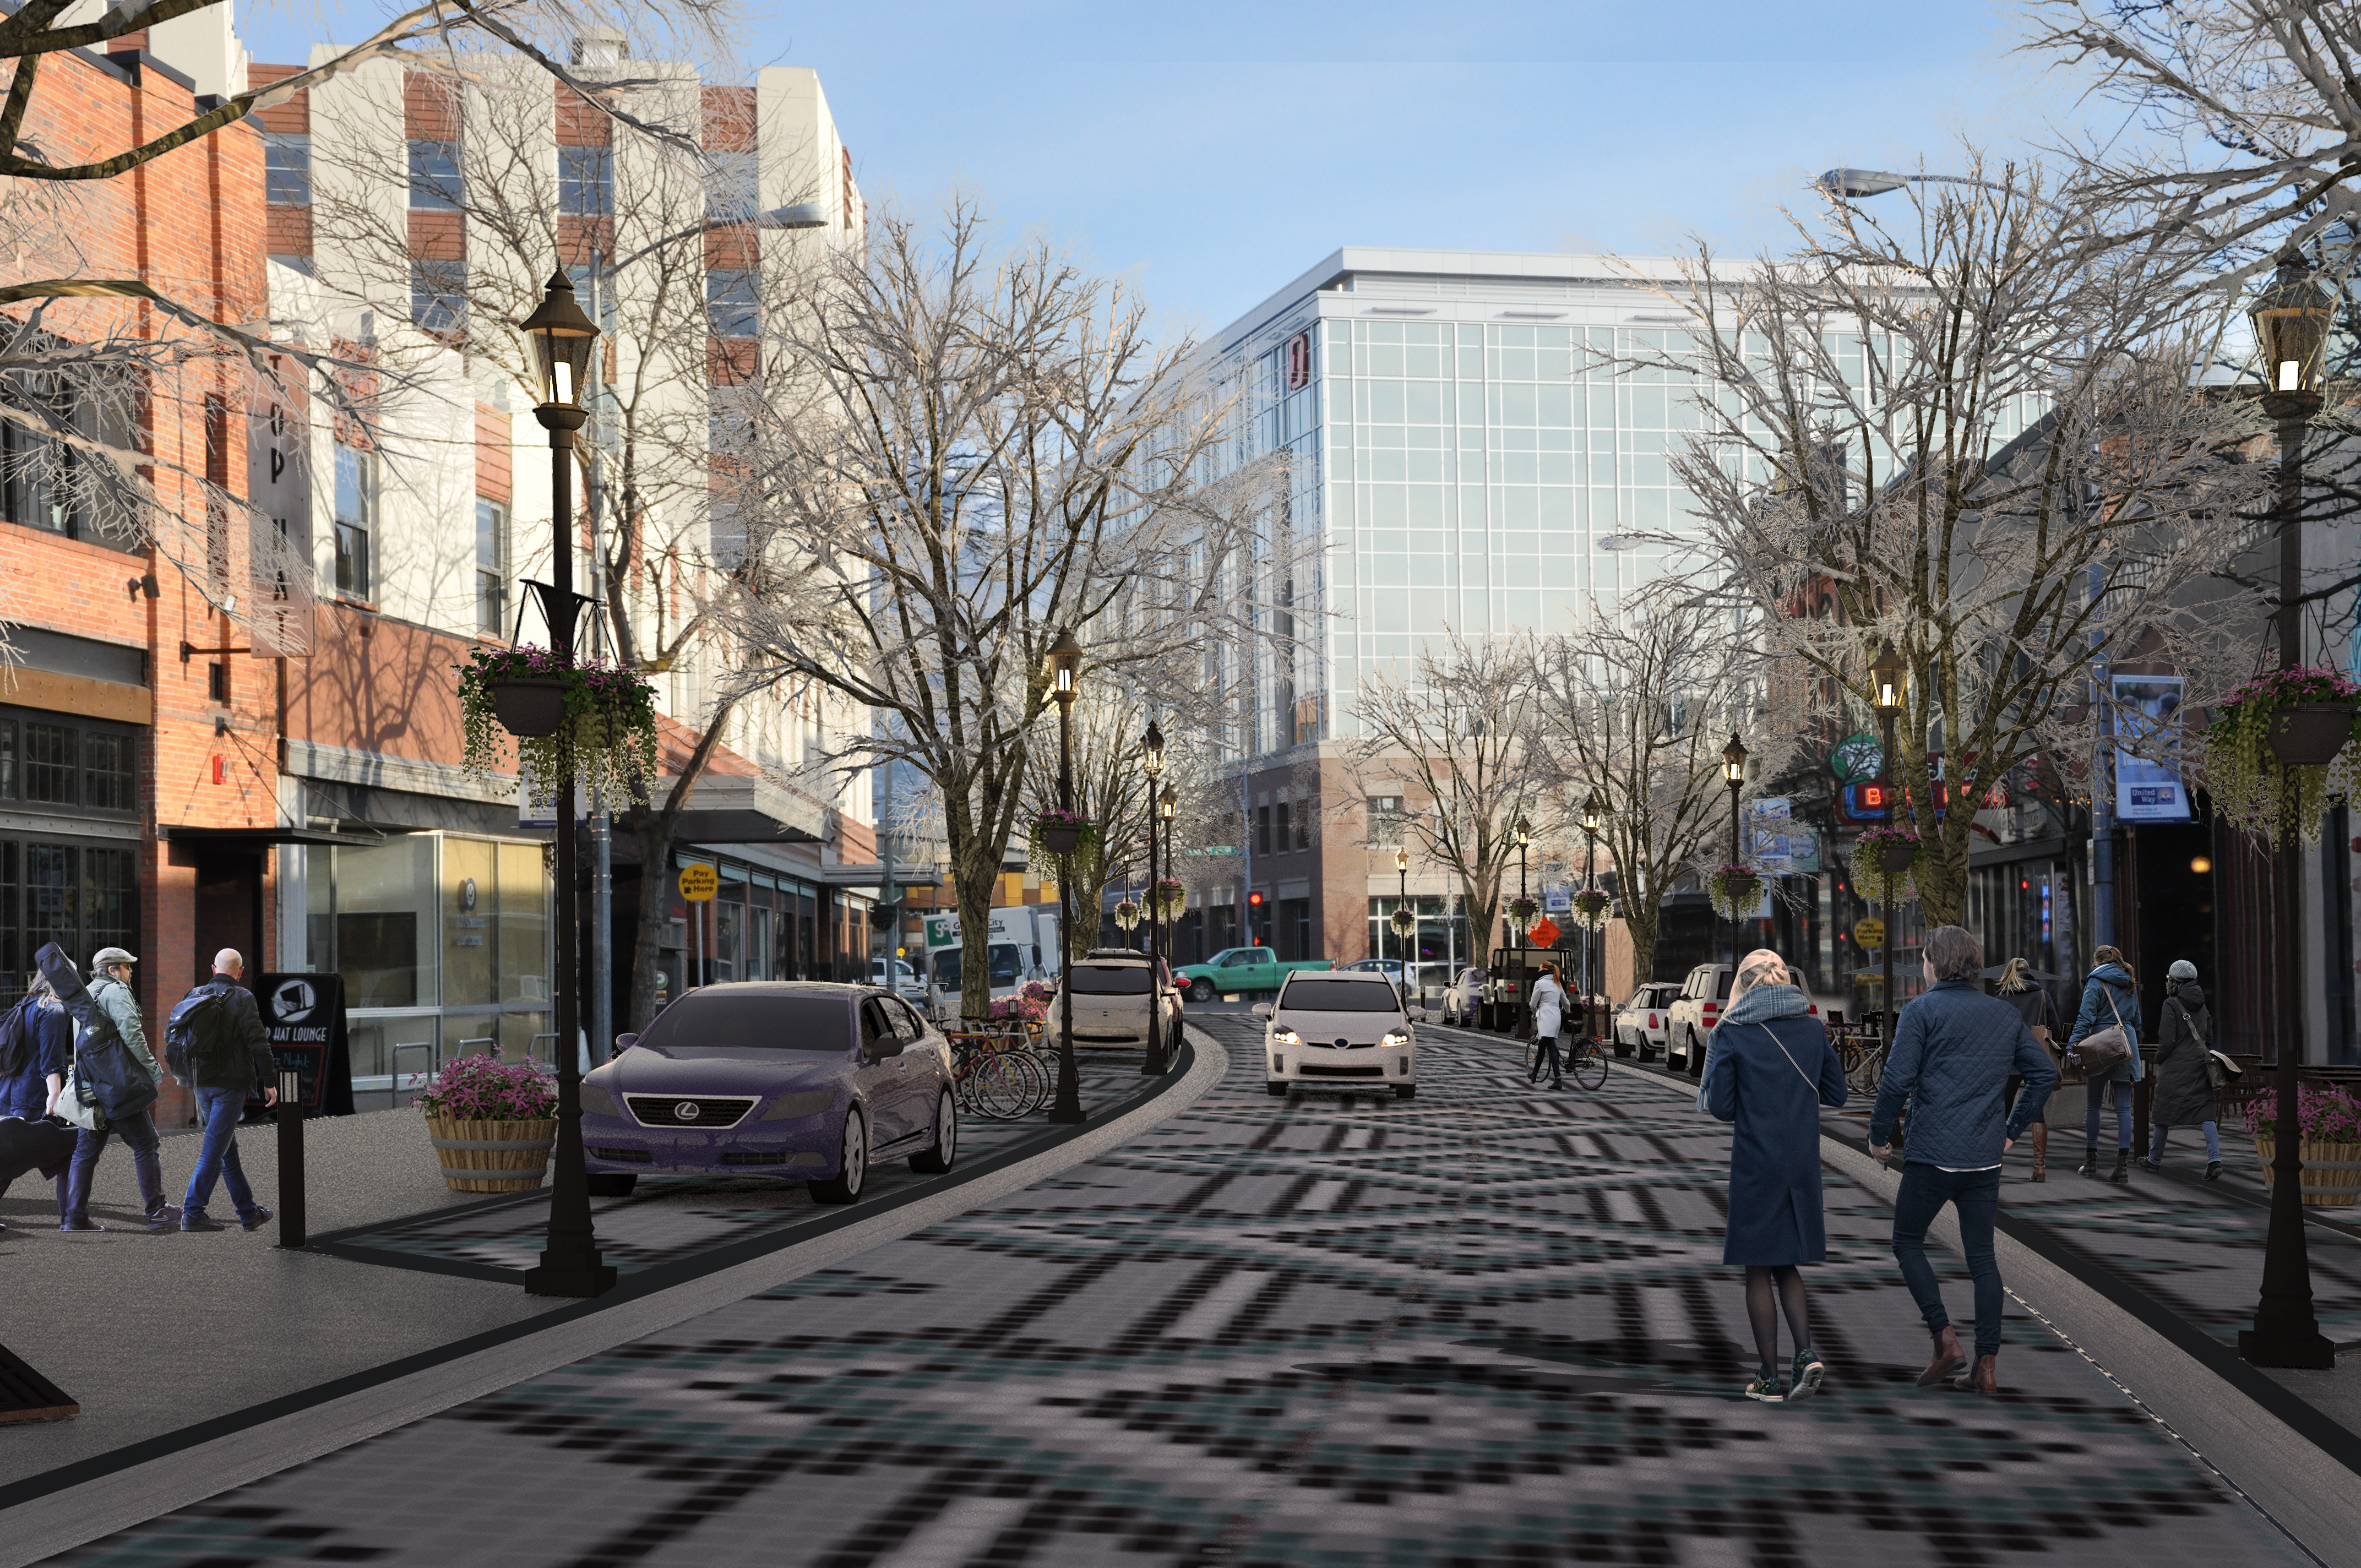 Introducing a Shared Street Concept